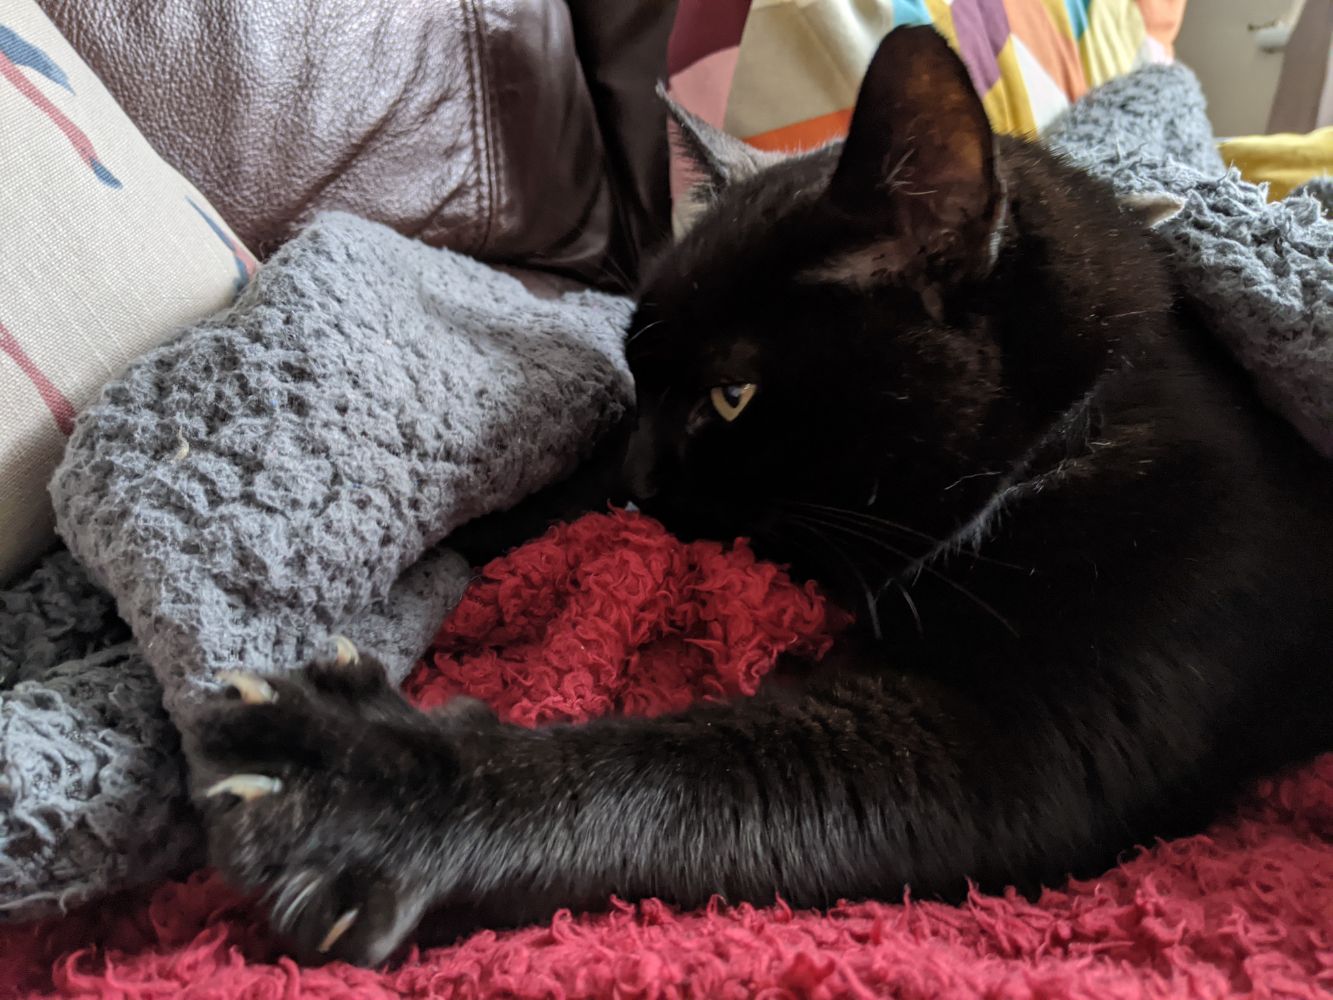 Black cat kneading on a grey blanket with his murder mittens, while nuzzling on a red blanket